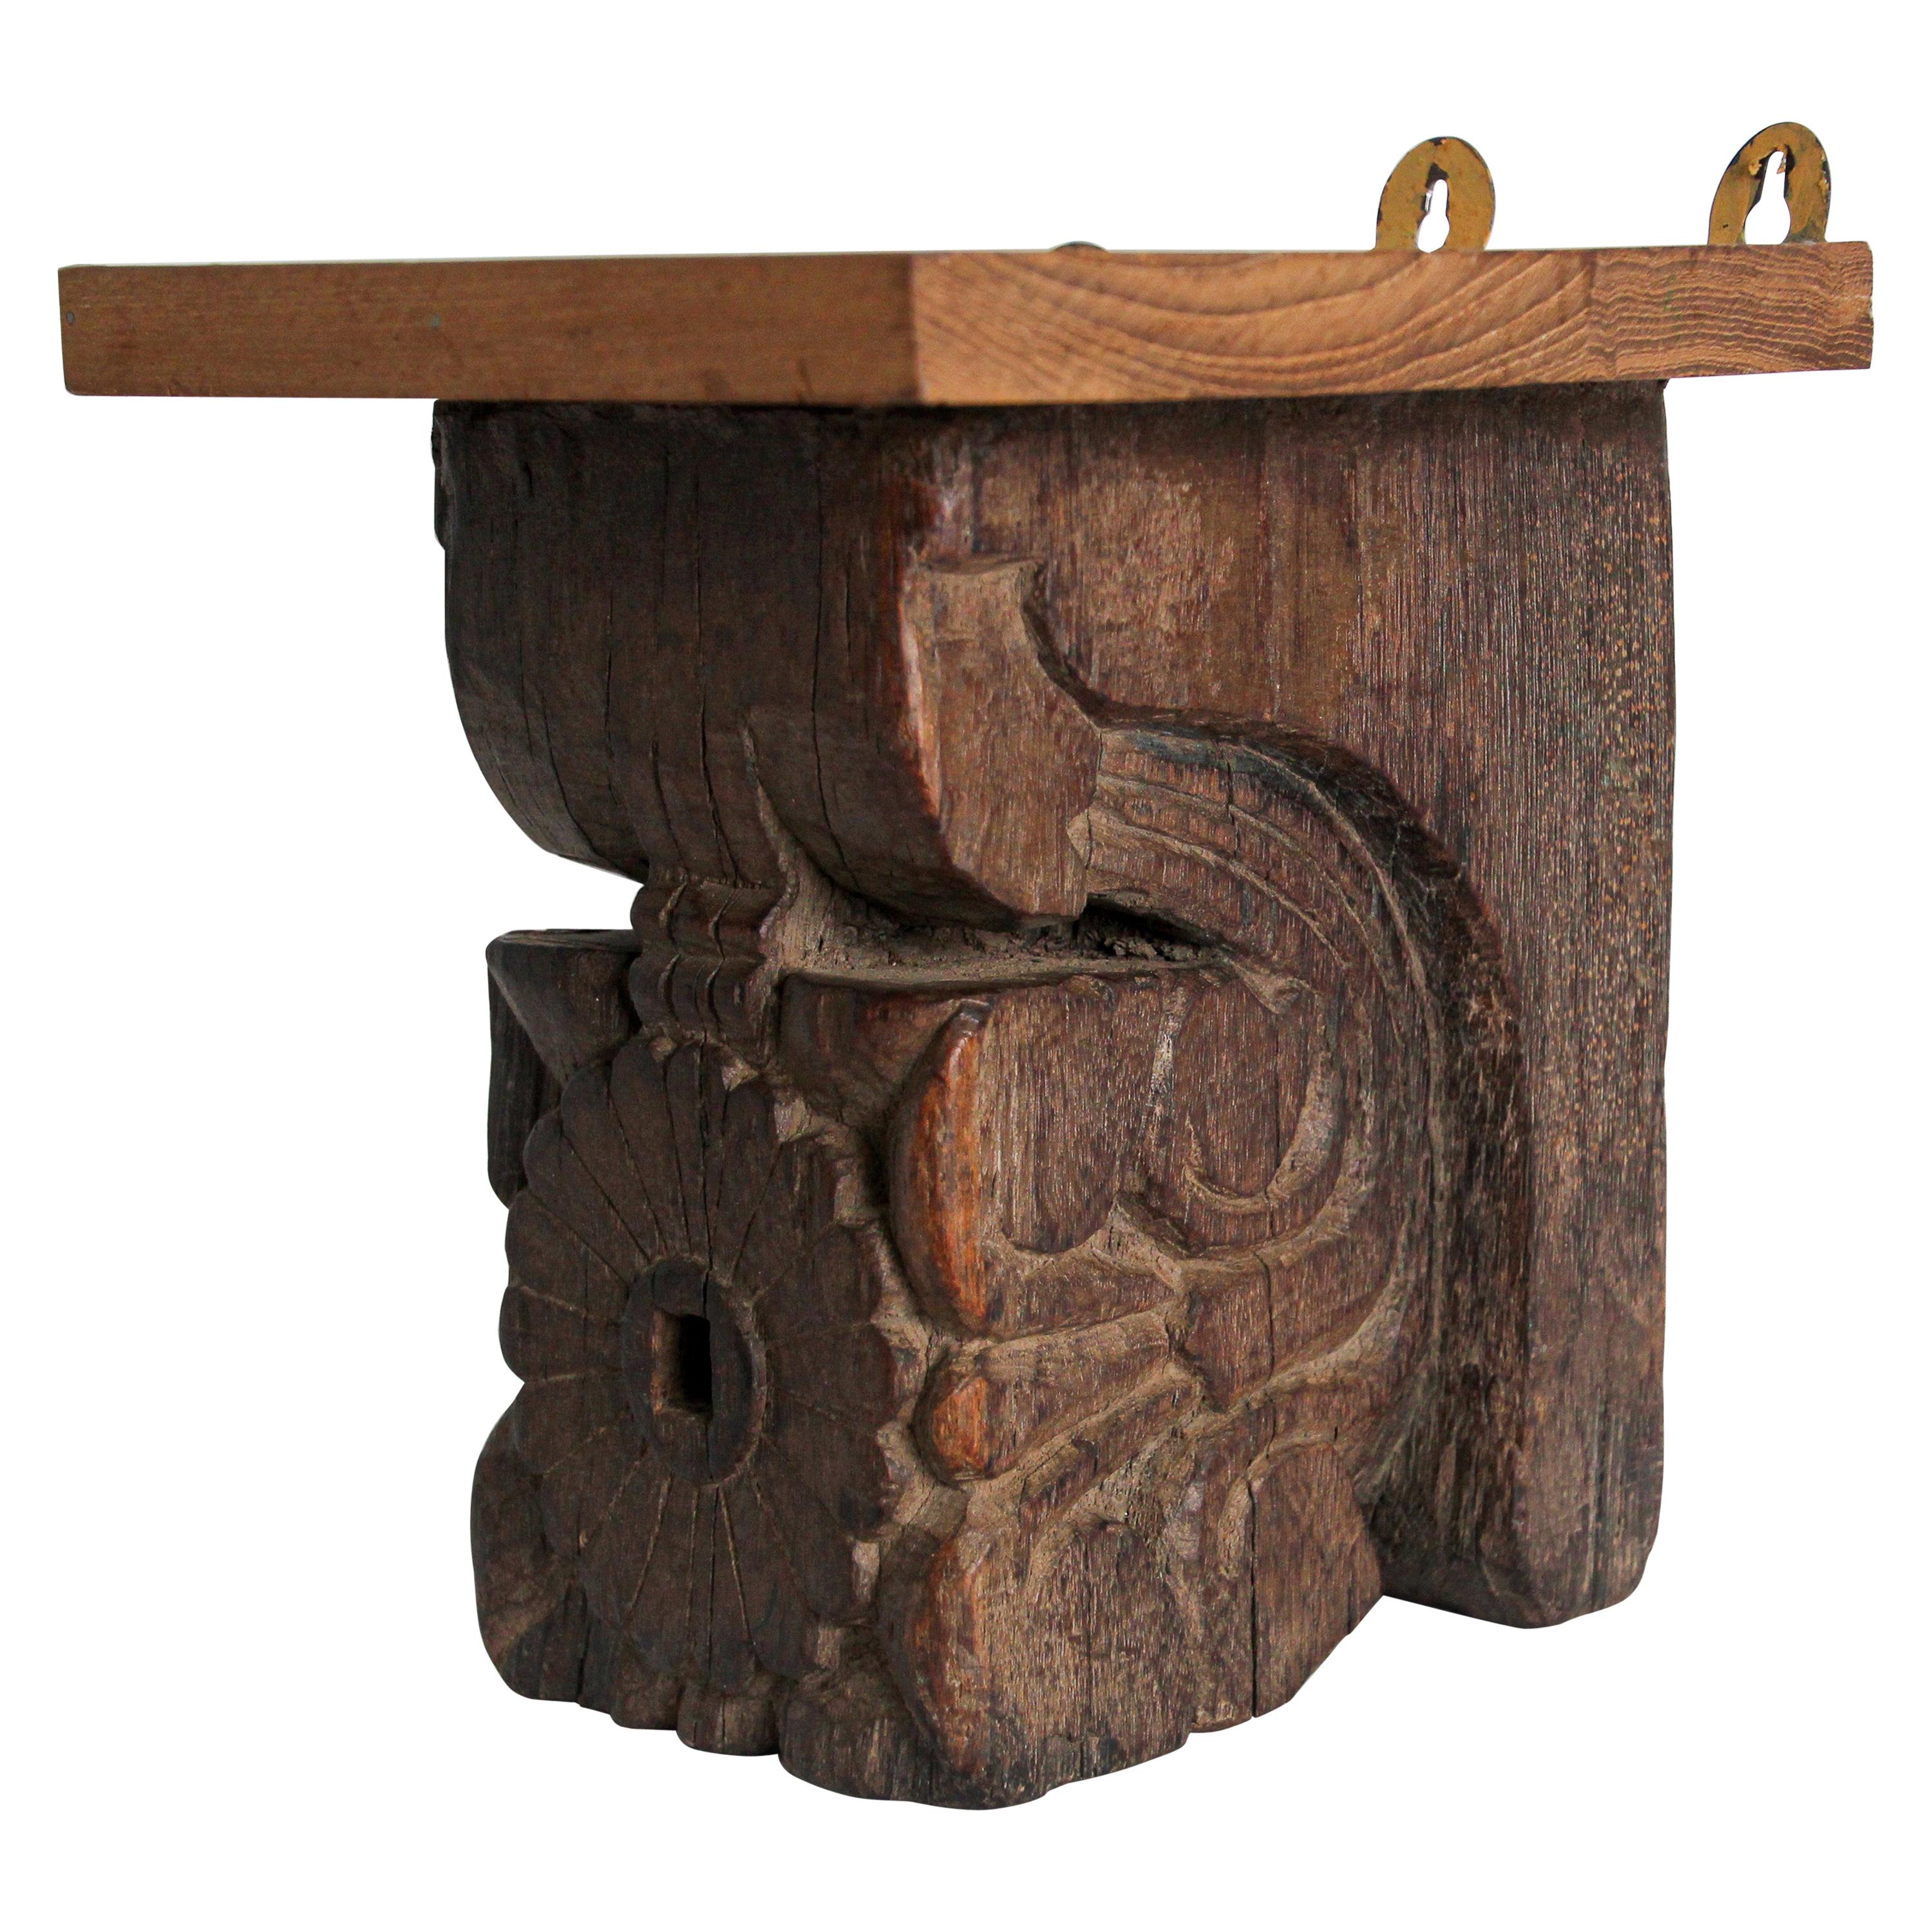 Architectural Carved Wood Temple Fragment Wall Bracket from India